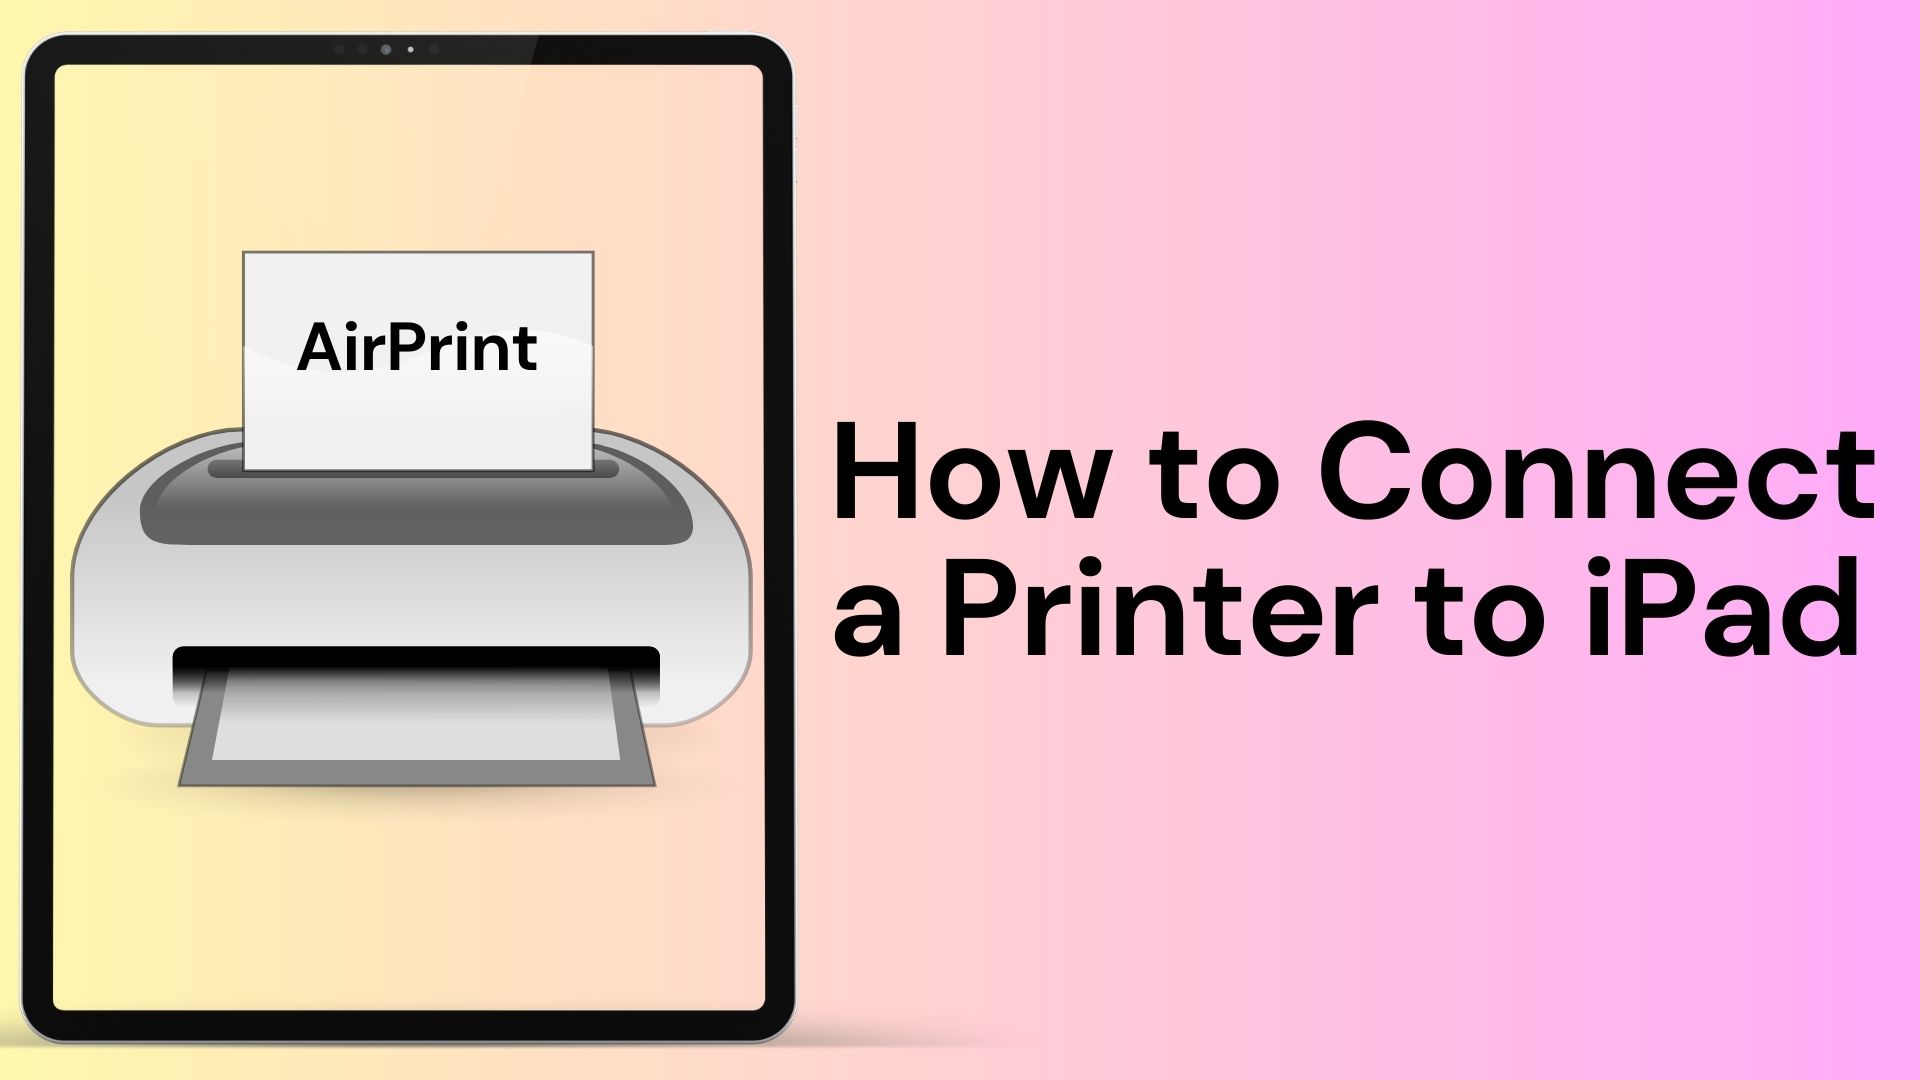 How to Connect a Printer to iPad